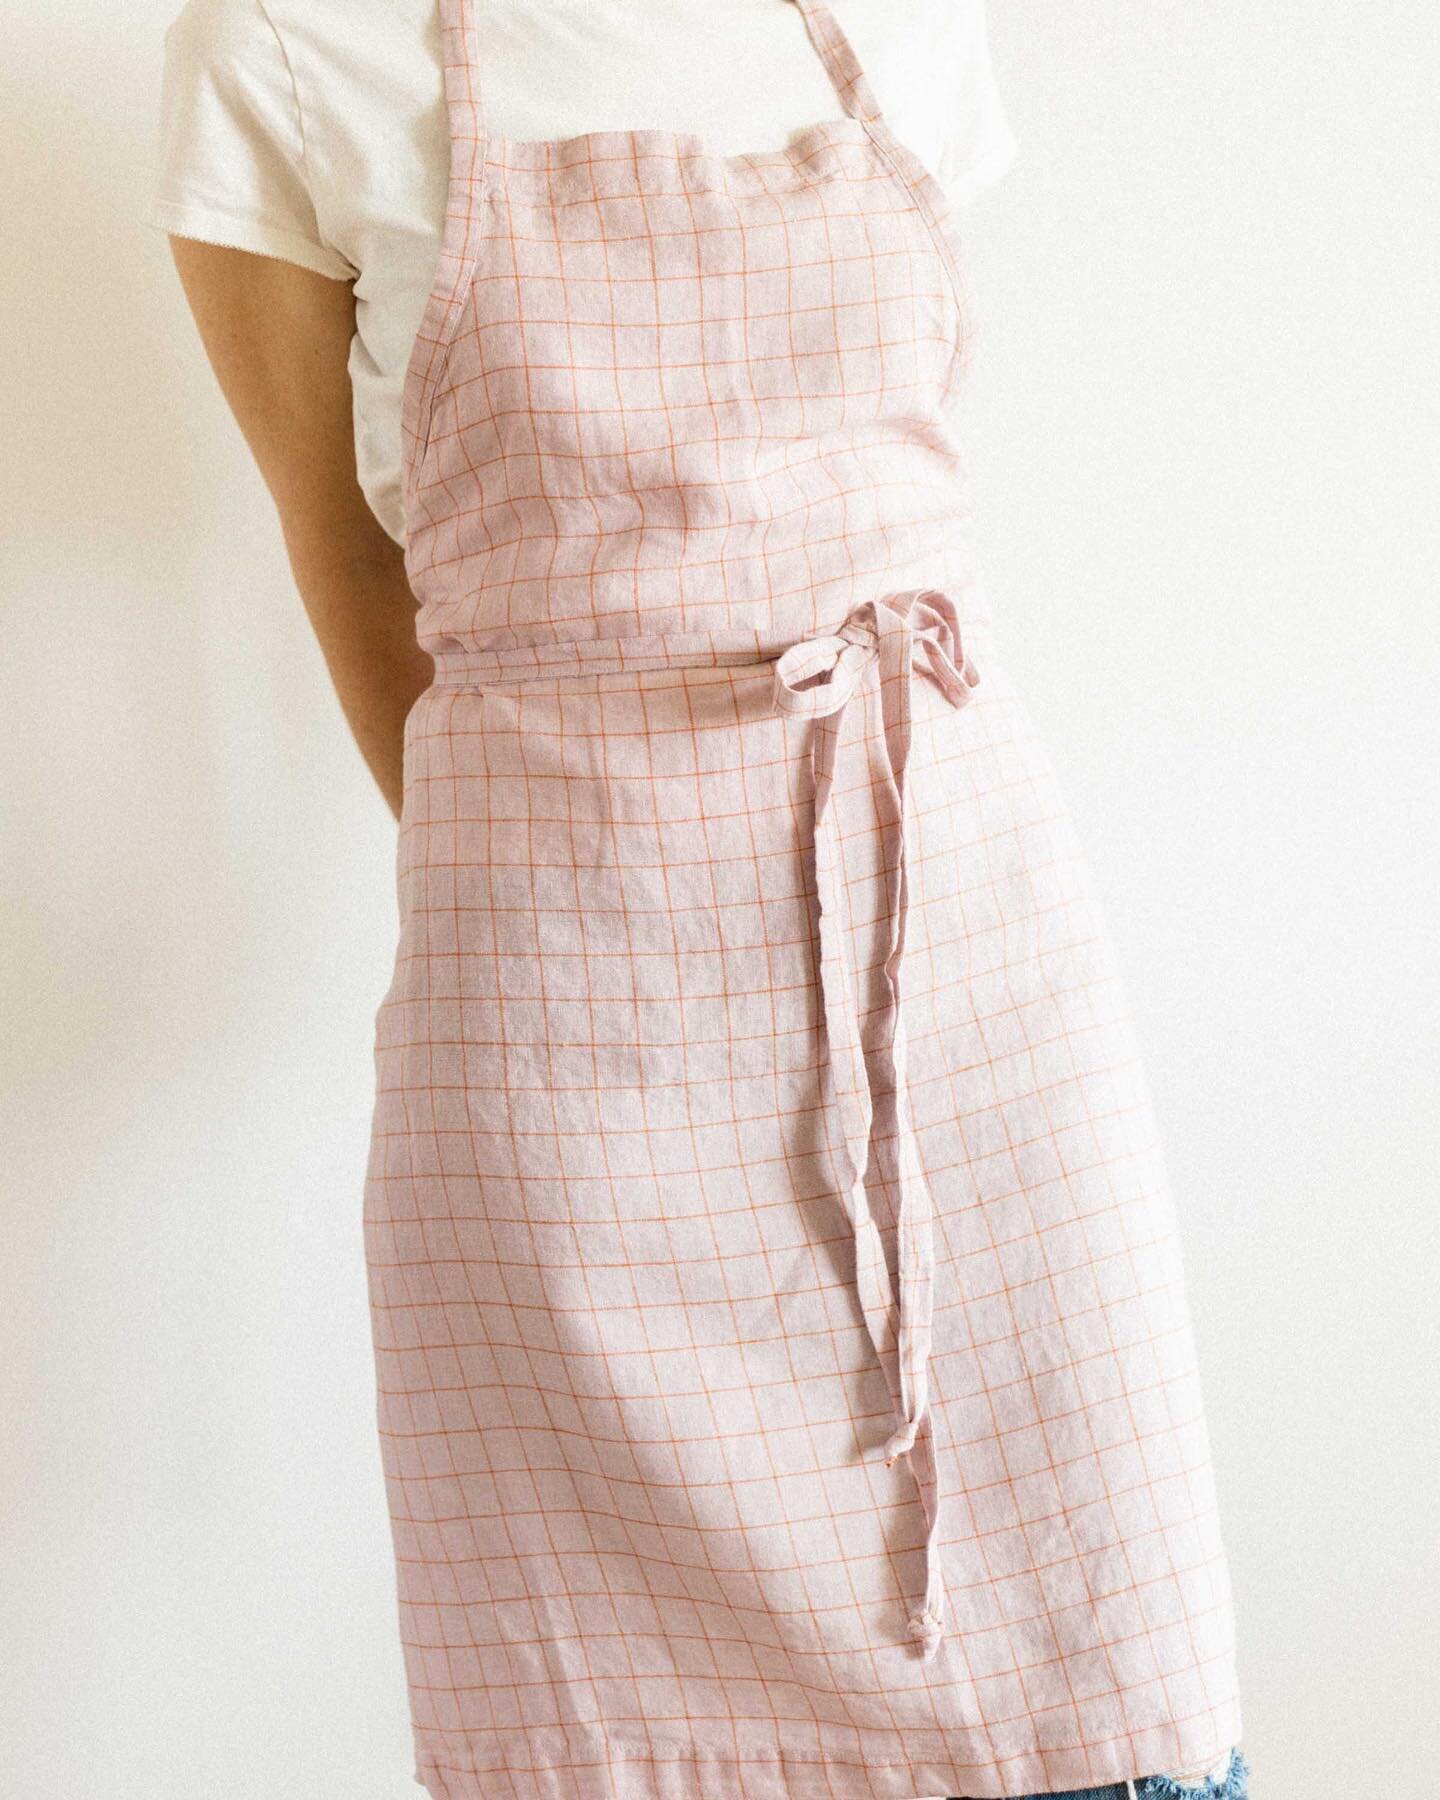 Pink linen apron with fine orange check and brass hardware. 

Shop link in profile.

#linen #linenapron #aprons #smallbatch #handmade #shopsmall #sourdough #baking #foodblogger #cooking #homemaker #homemaking #mothersday #giftsforbakers #mothersdaygi